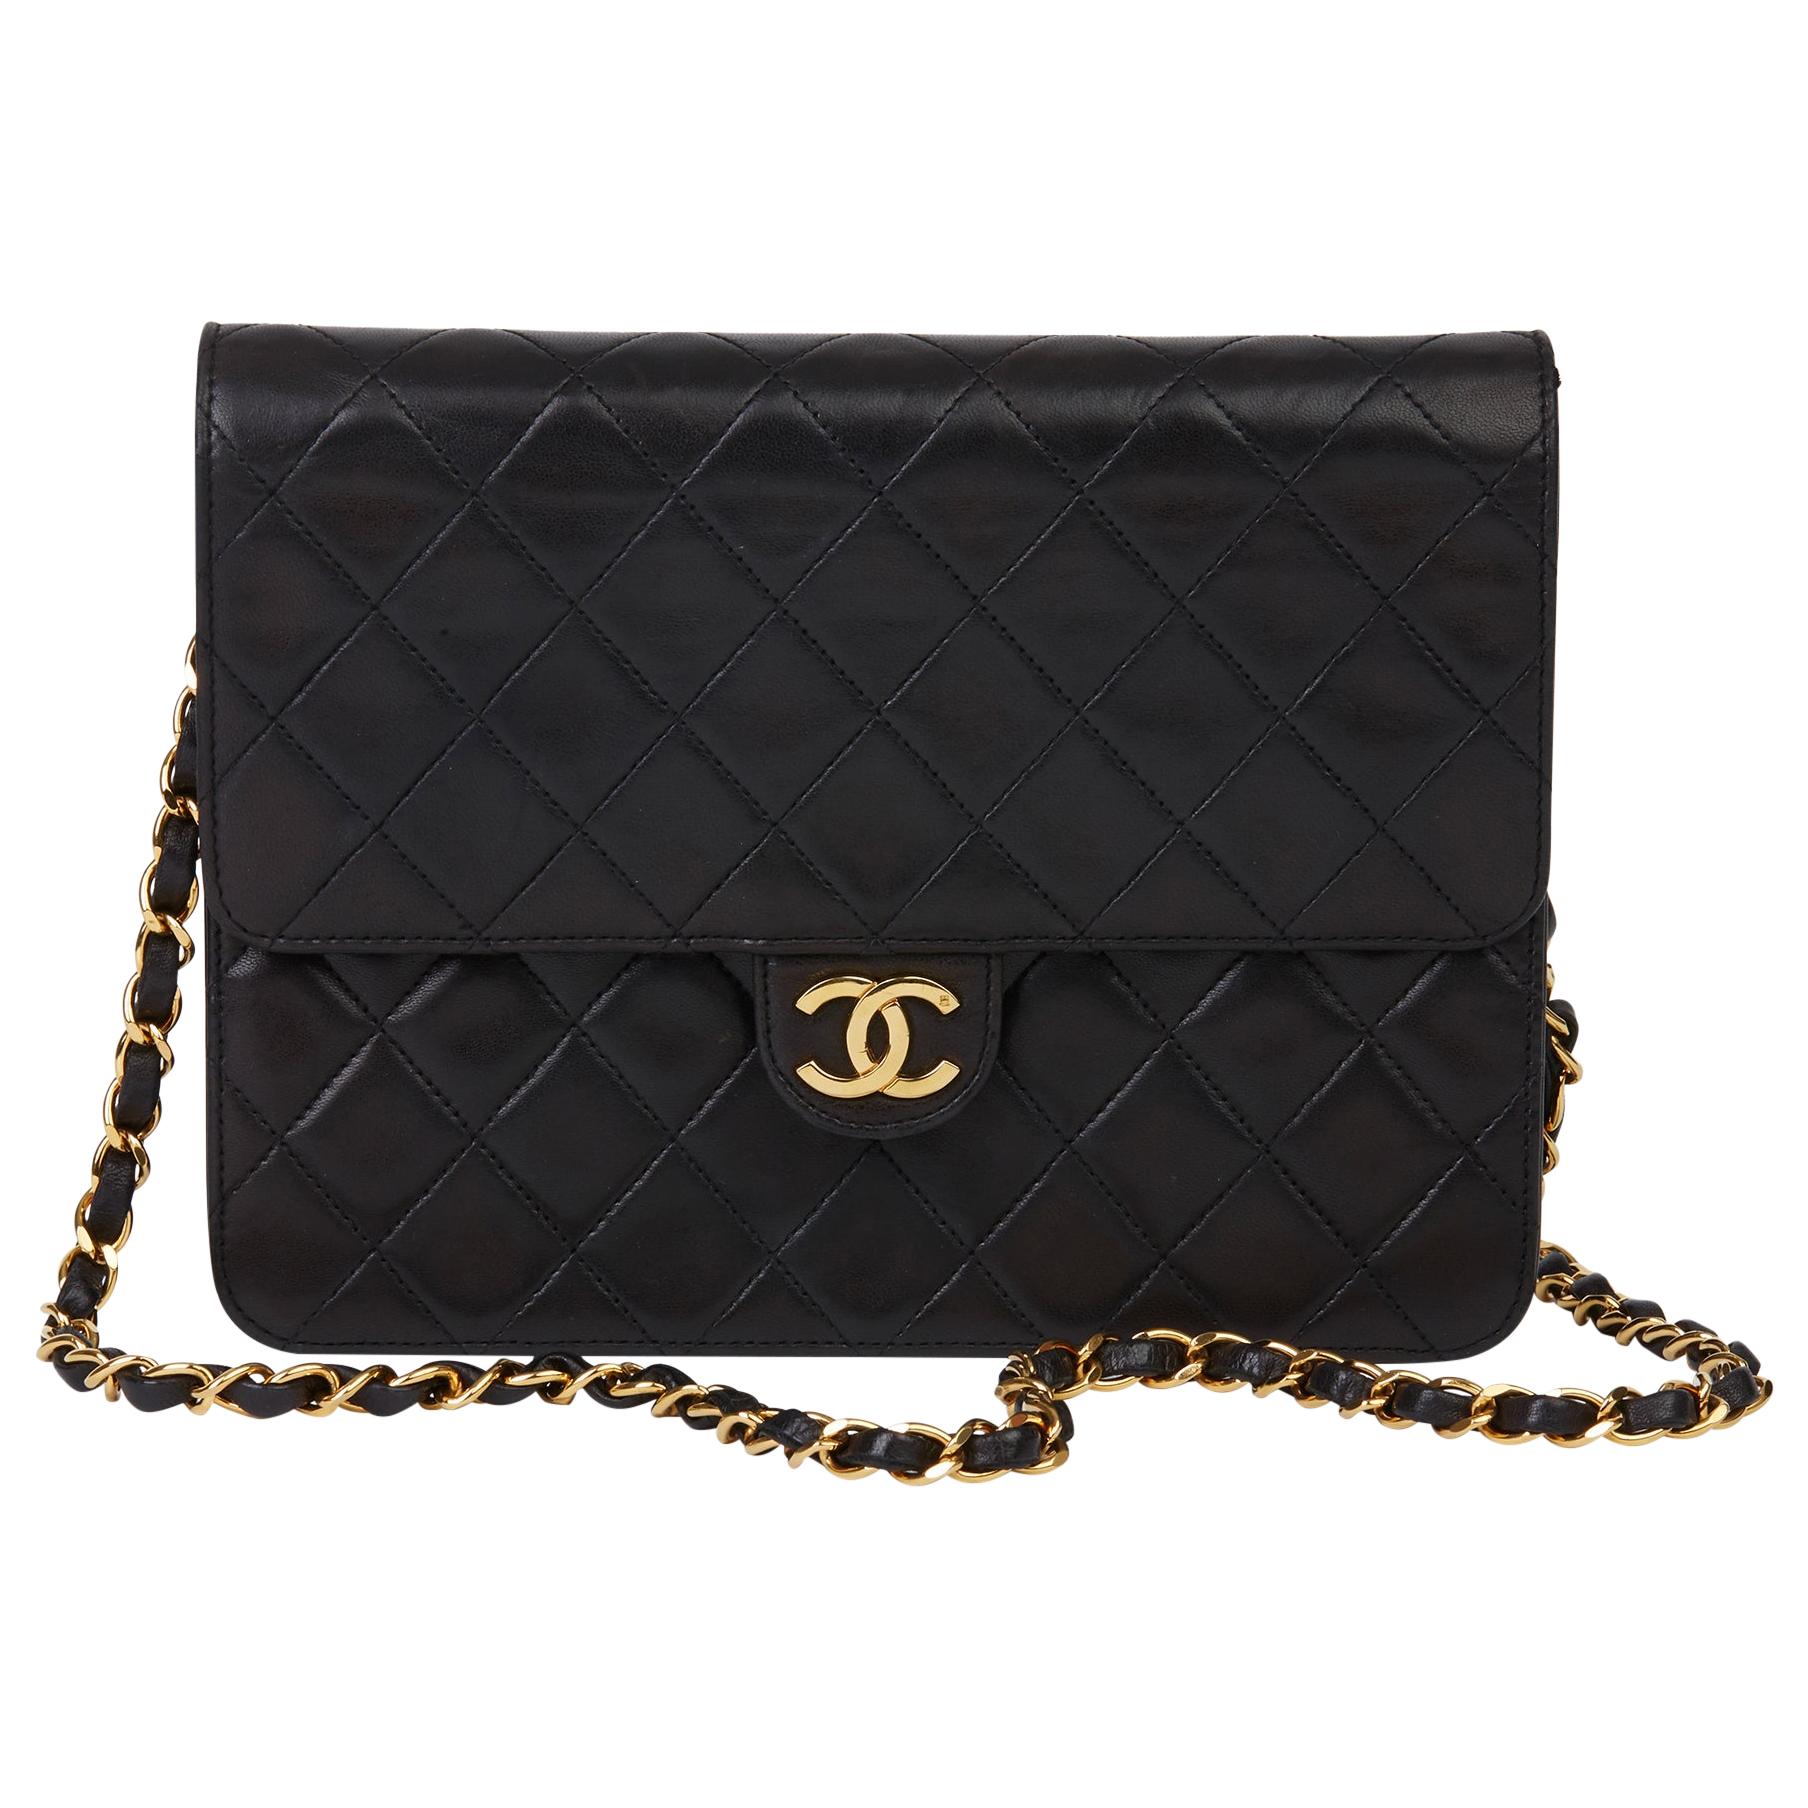 1992 Chanel Black Quilted Lambskin Vintage Small Classic Single Flap Bag